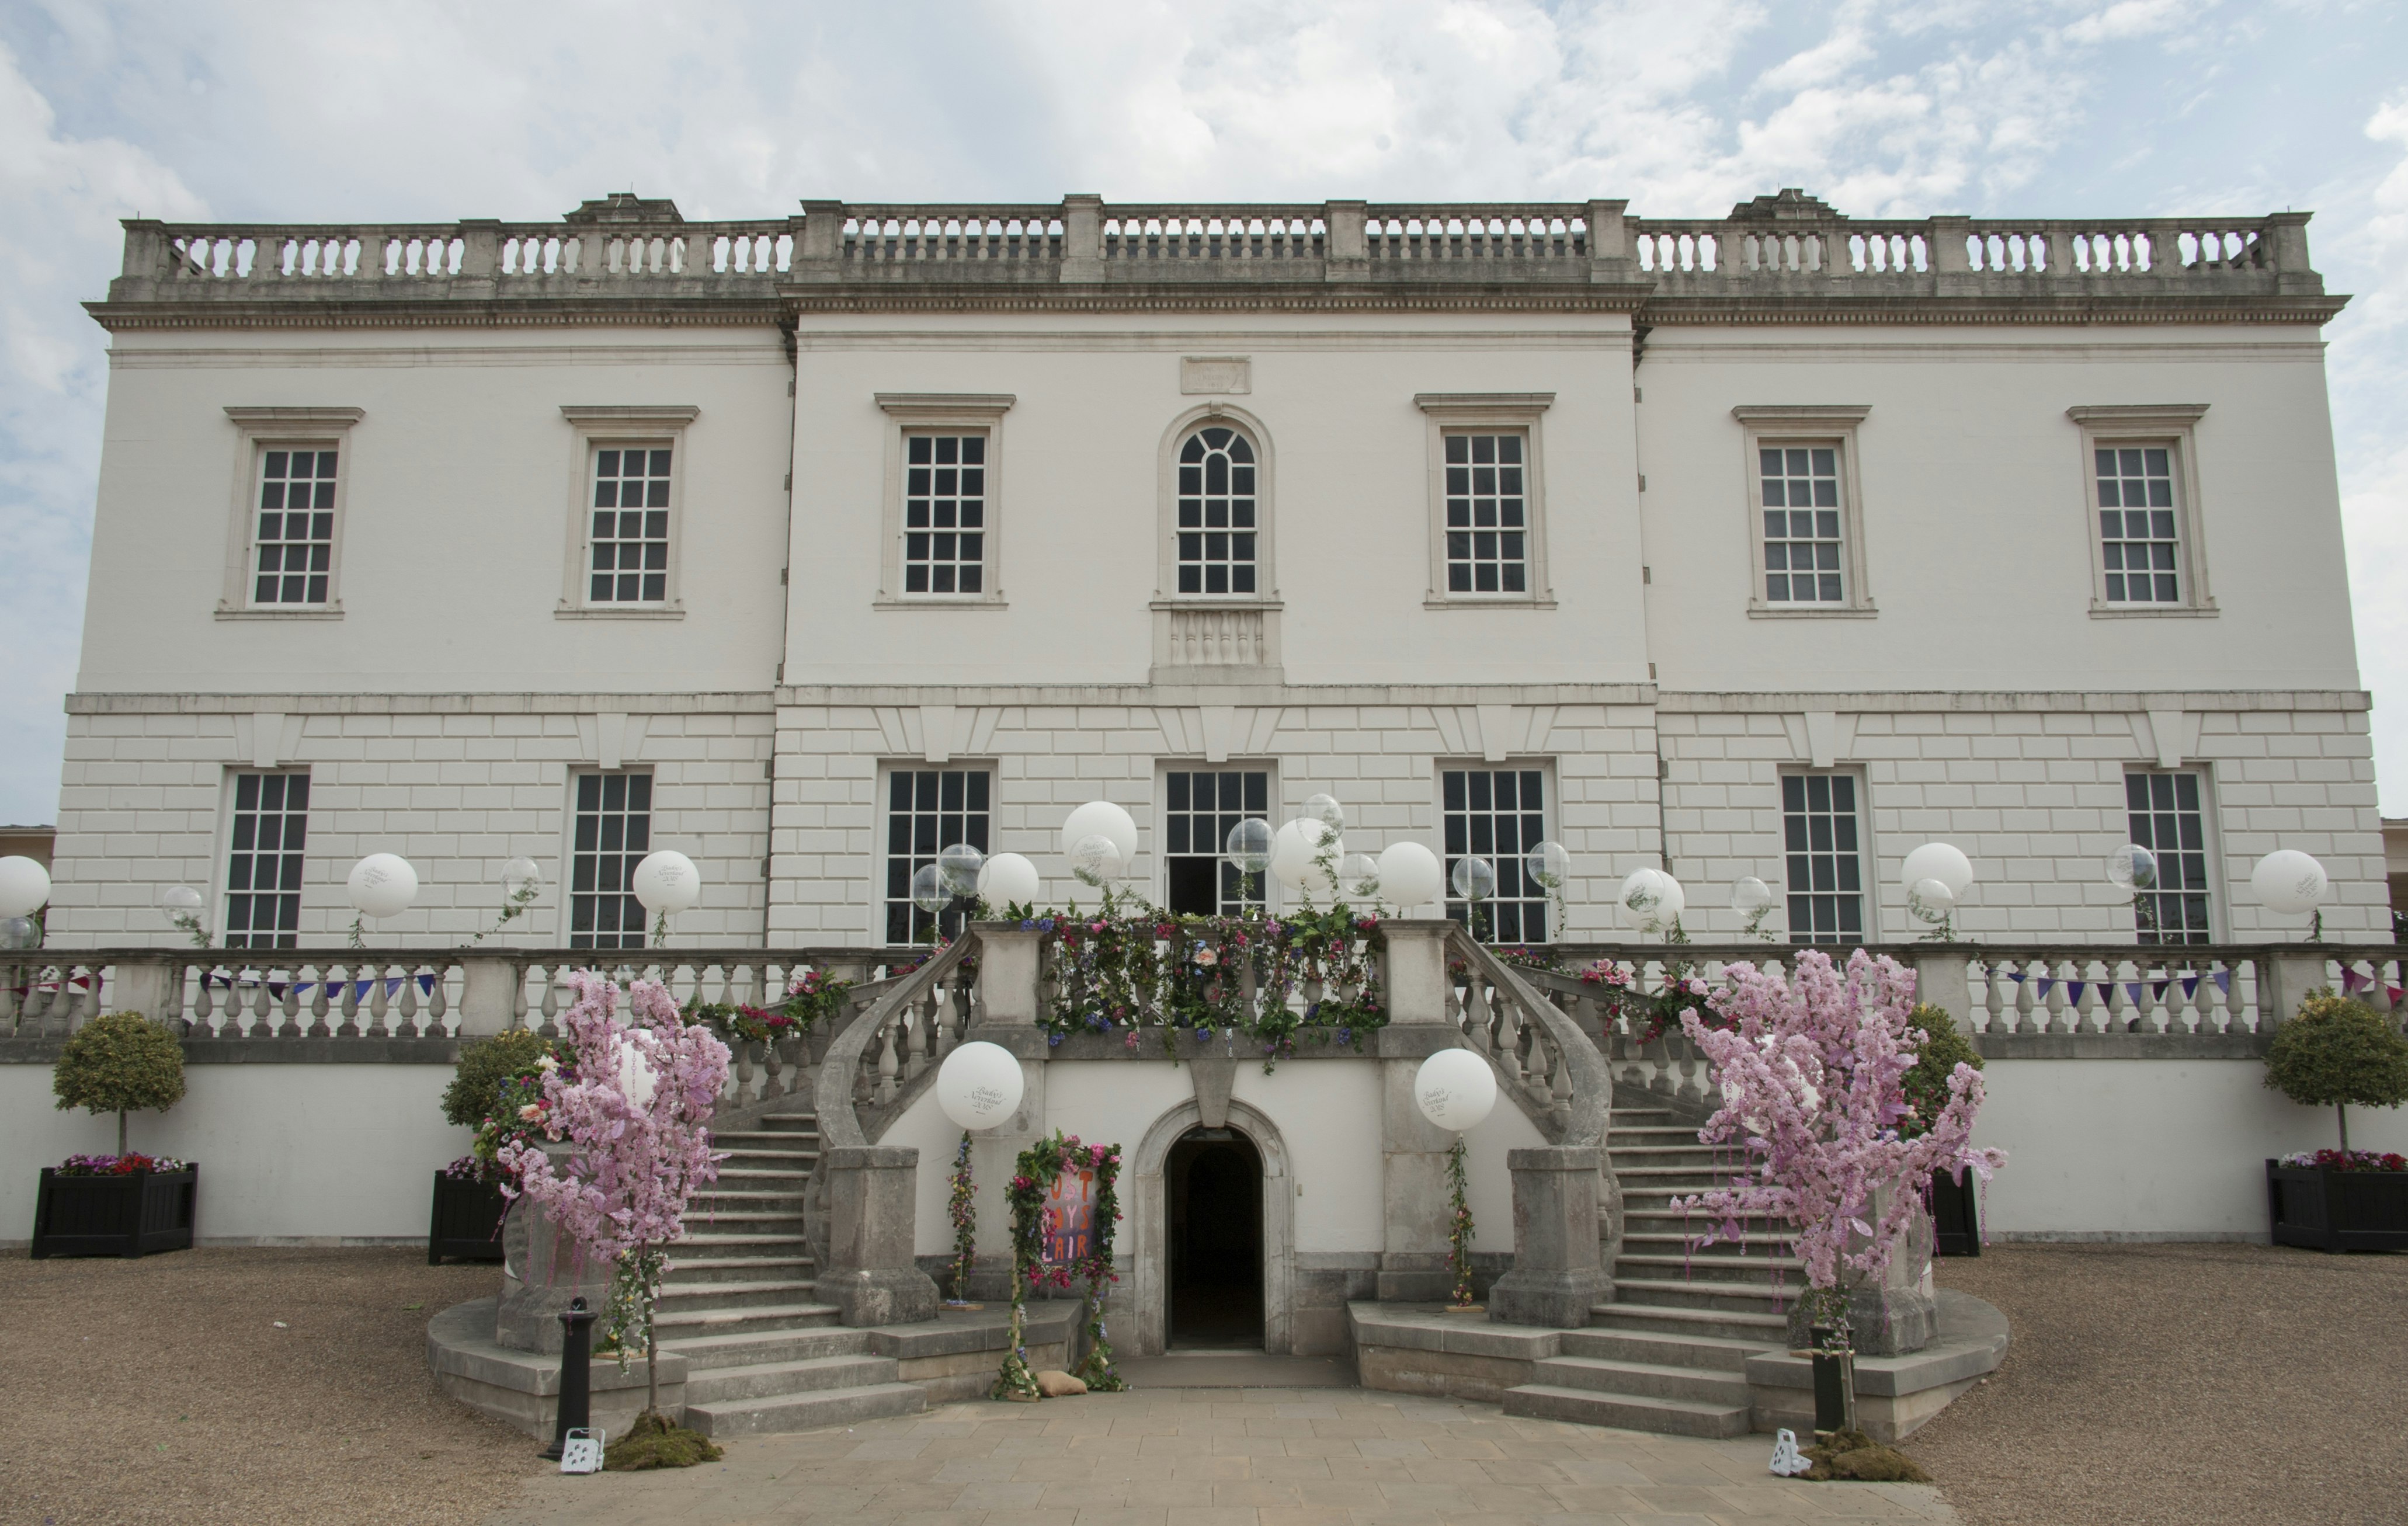 Meeting Rooms Venues in London - The Queen's House